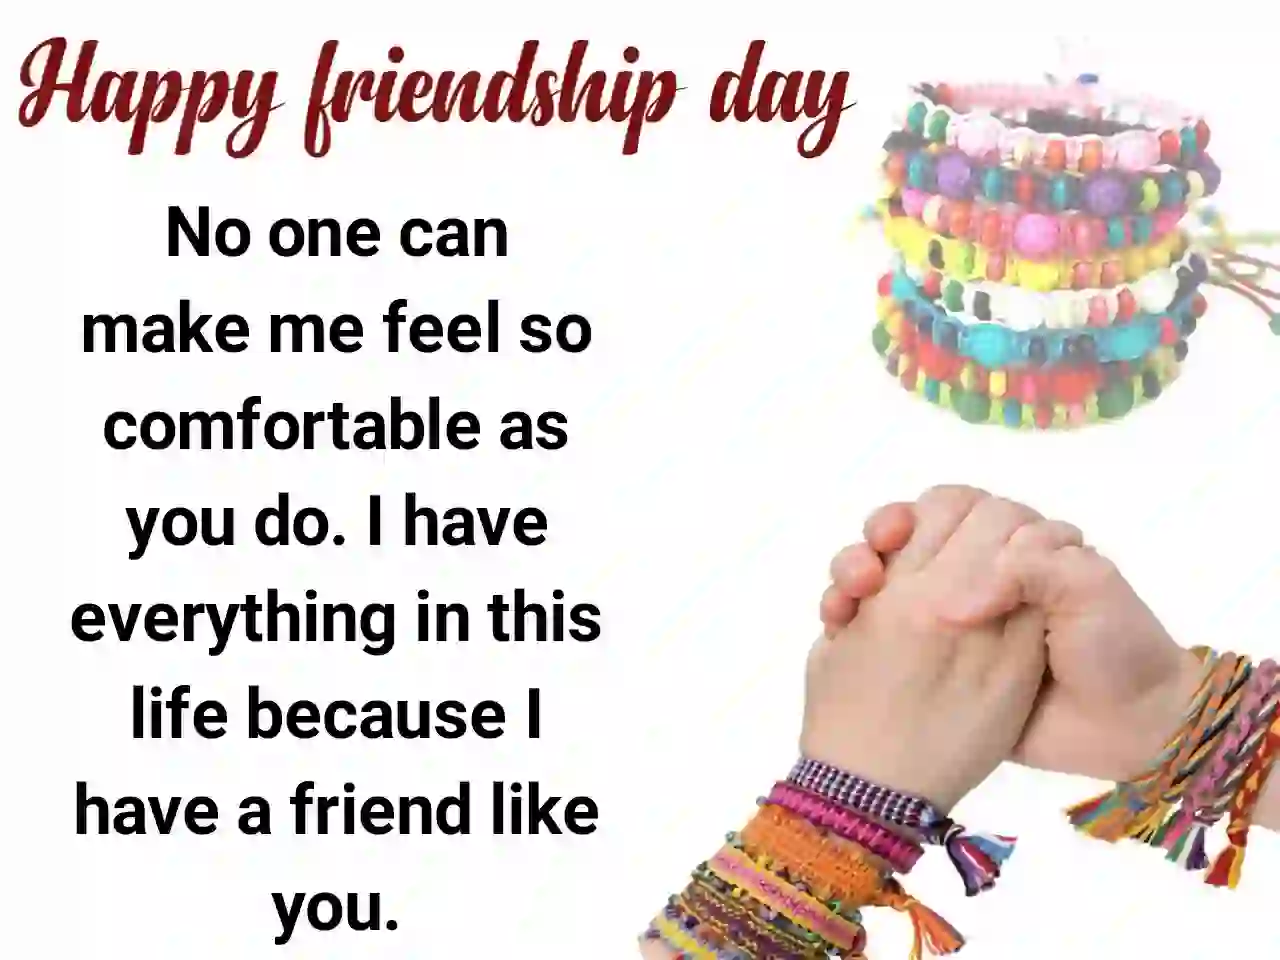 Friendship day greetings in english